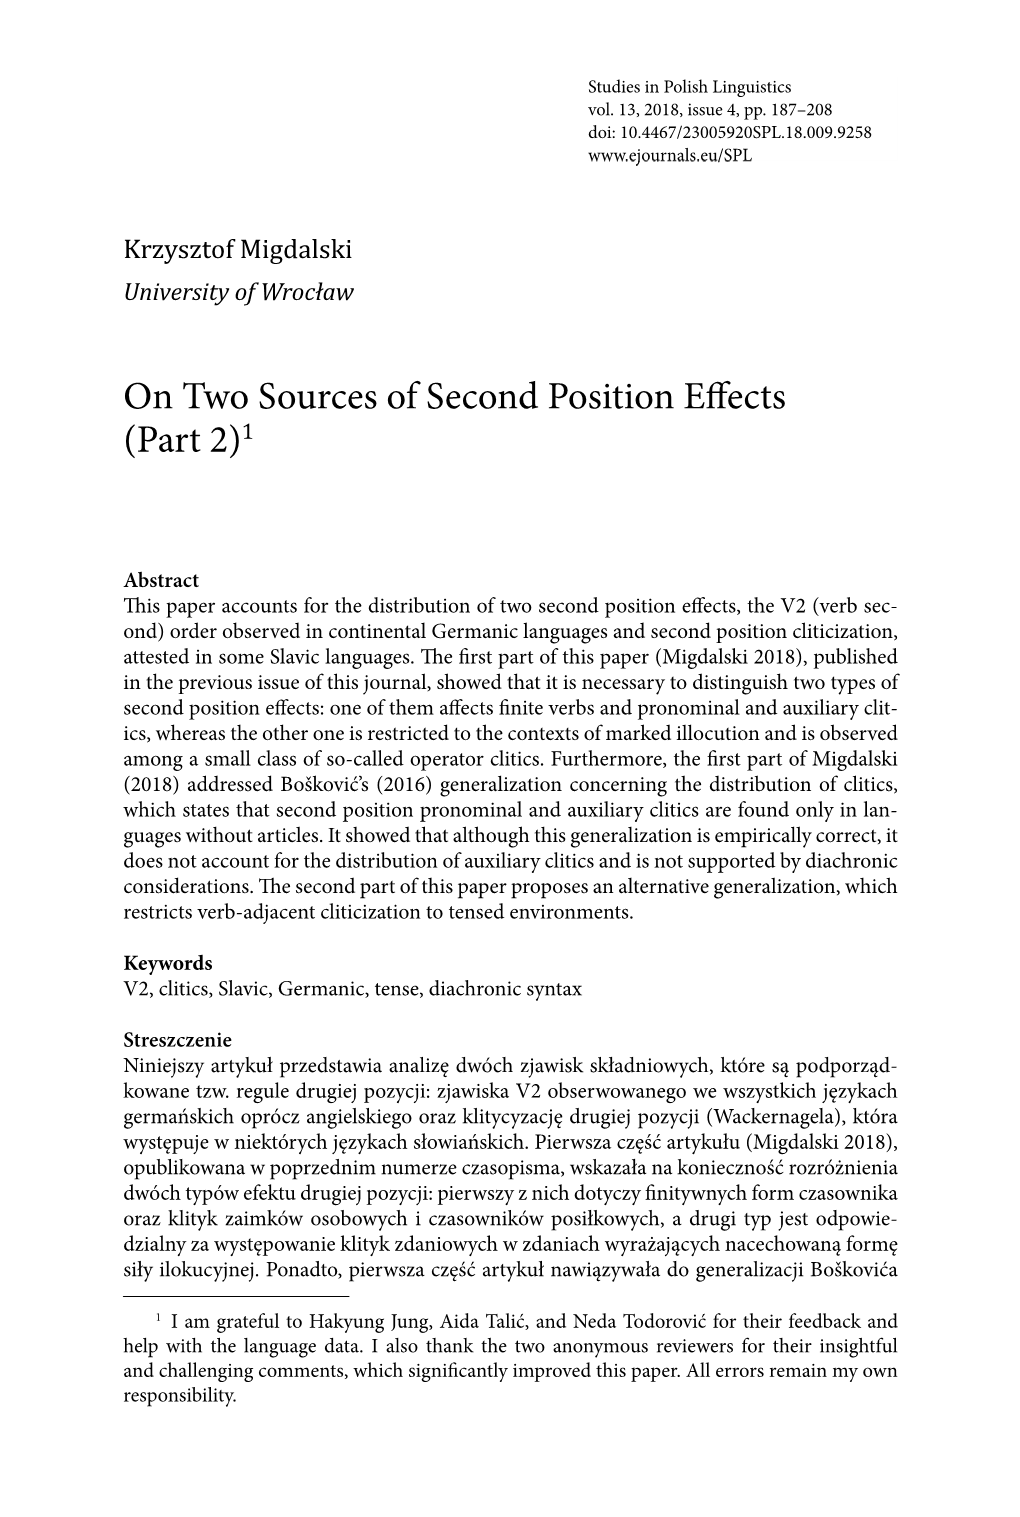 On Two Sources of Second Position Effects (Part 2)1